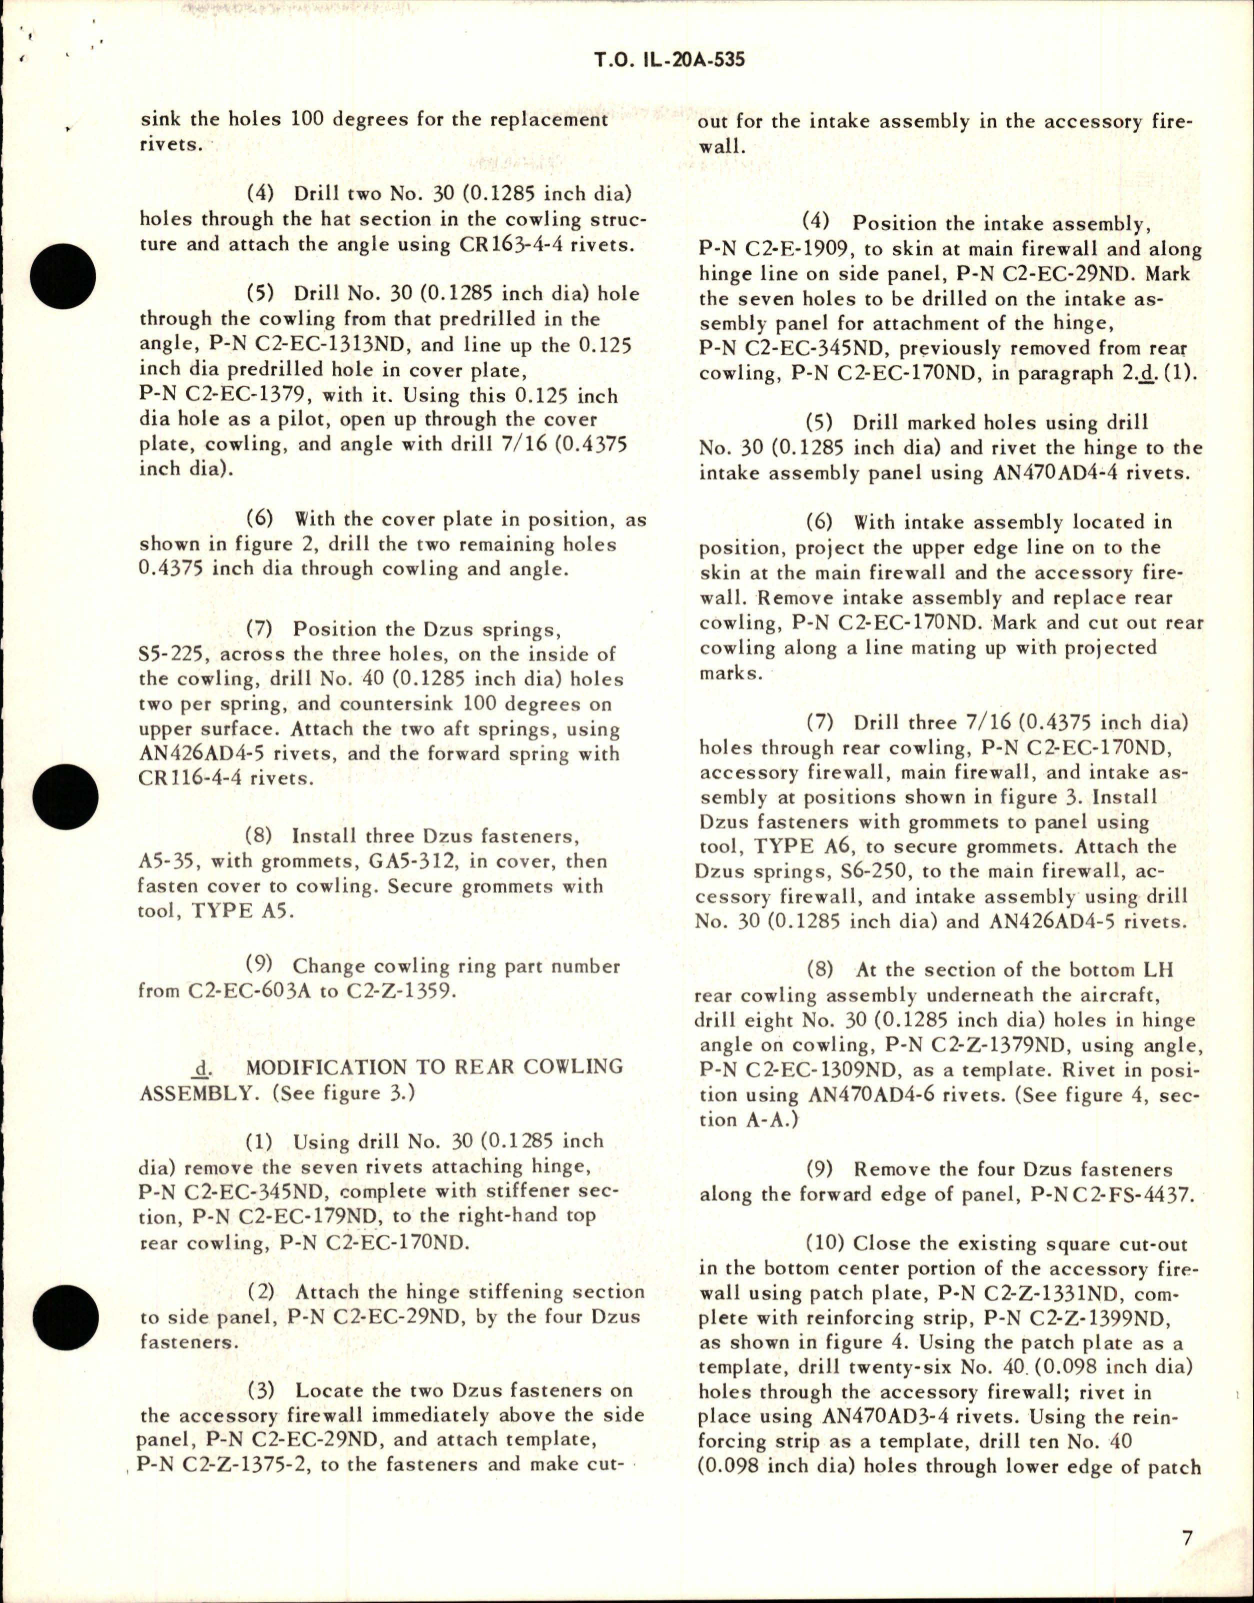 Sample page 7 from AirCorps Library document: Installation of All Weather Air Induction System - L-20A Series